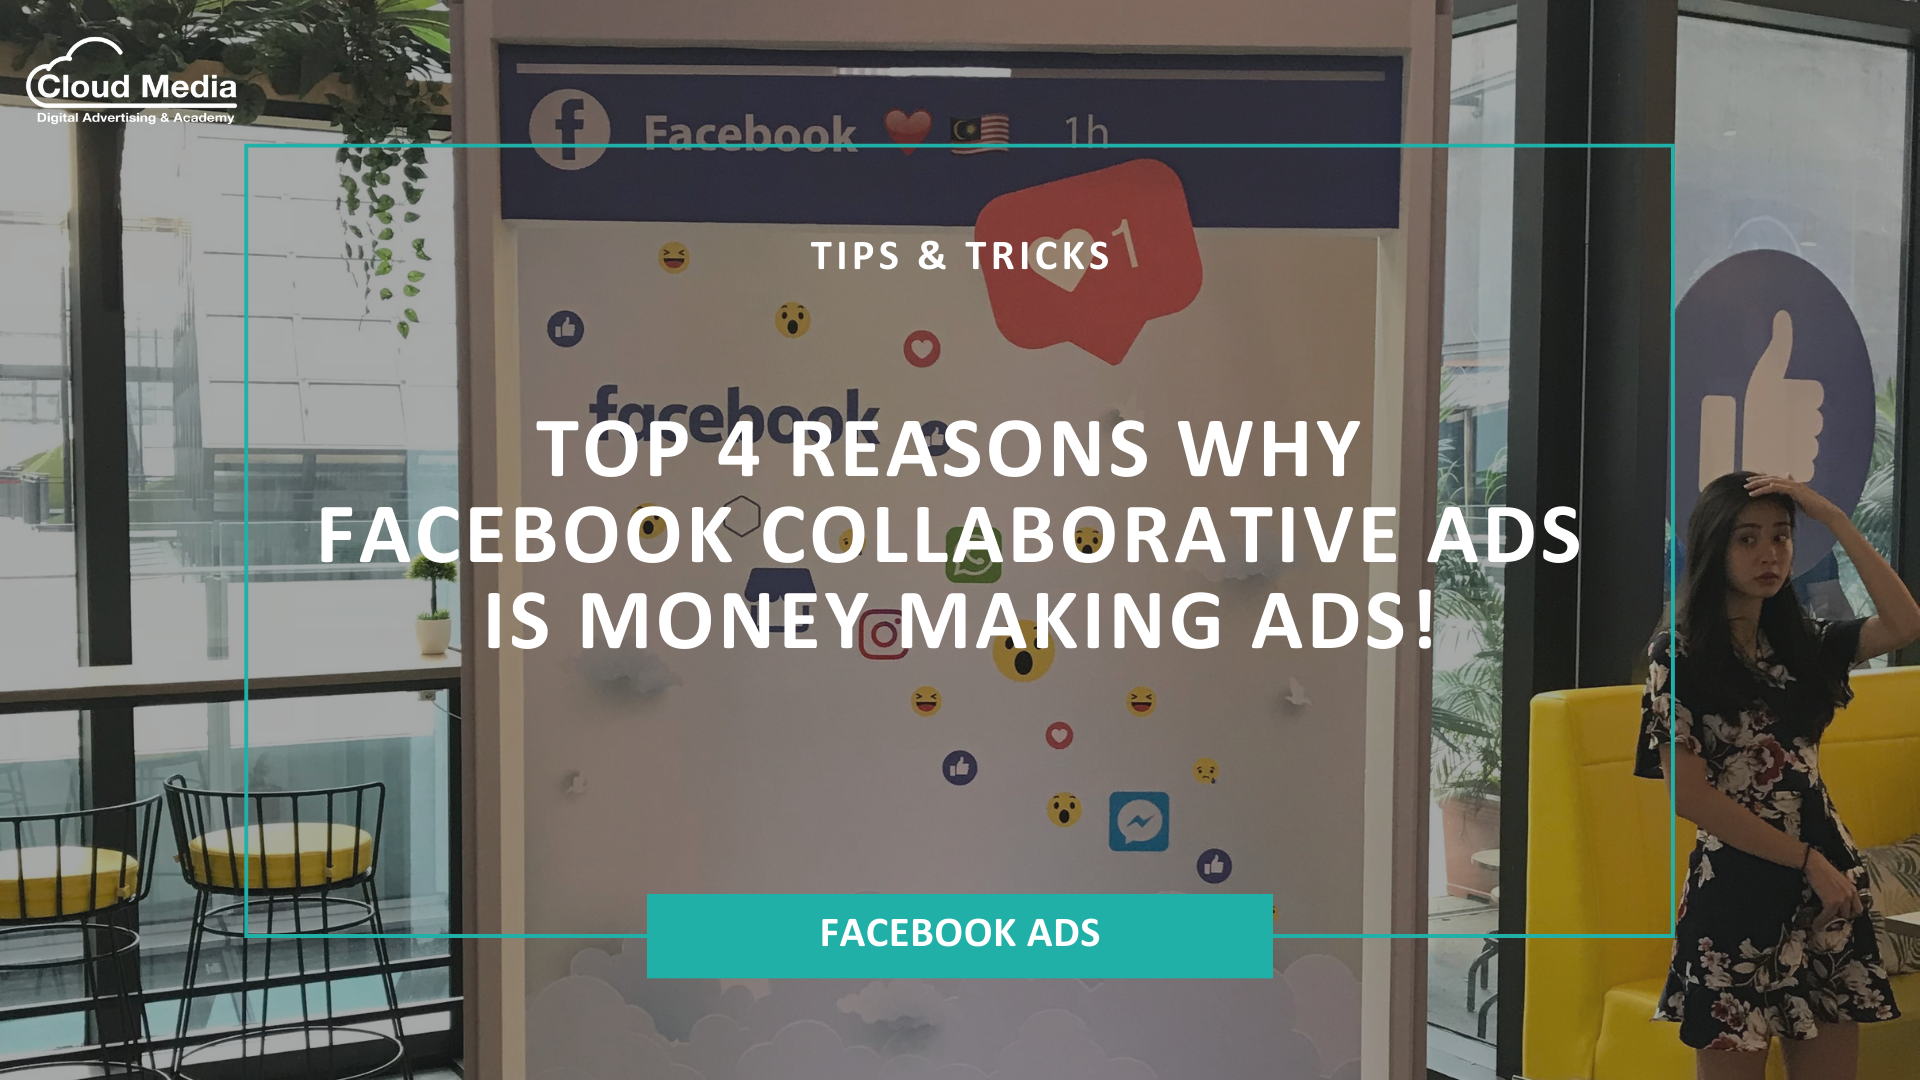 Top 4 Reasons Why Facebook Collaborative Ads is Money Making Ads!